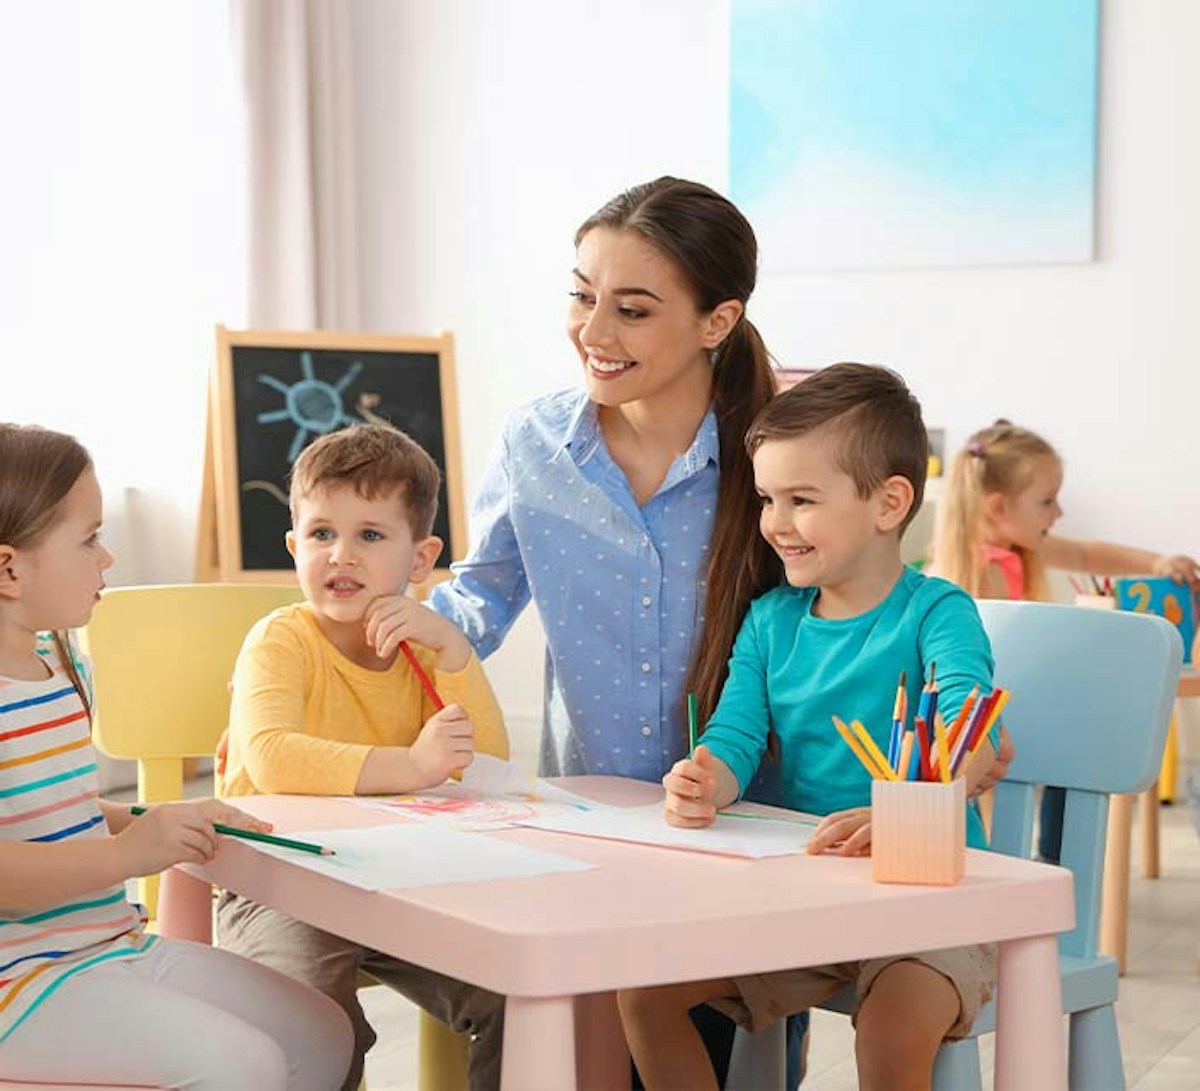 Early Childhood Educator working with children